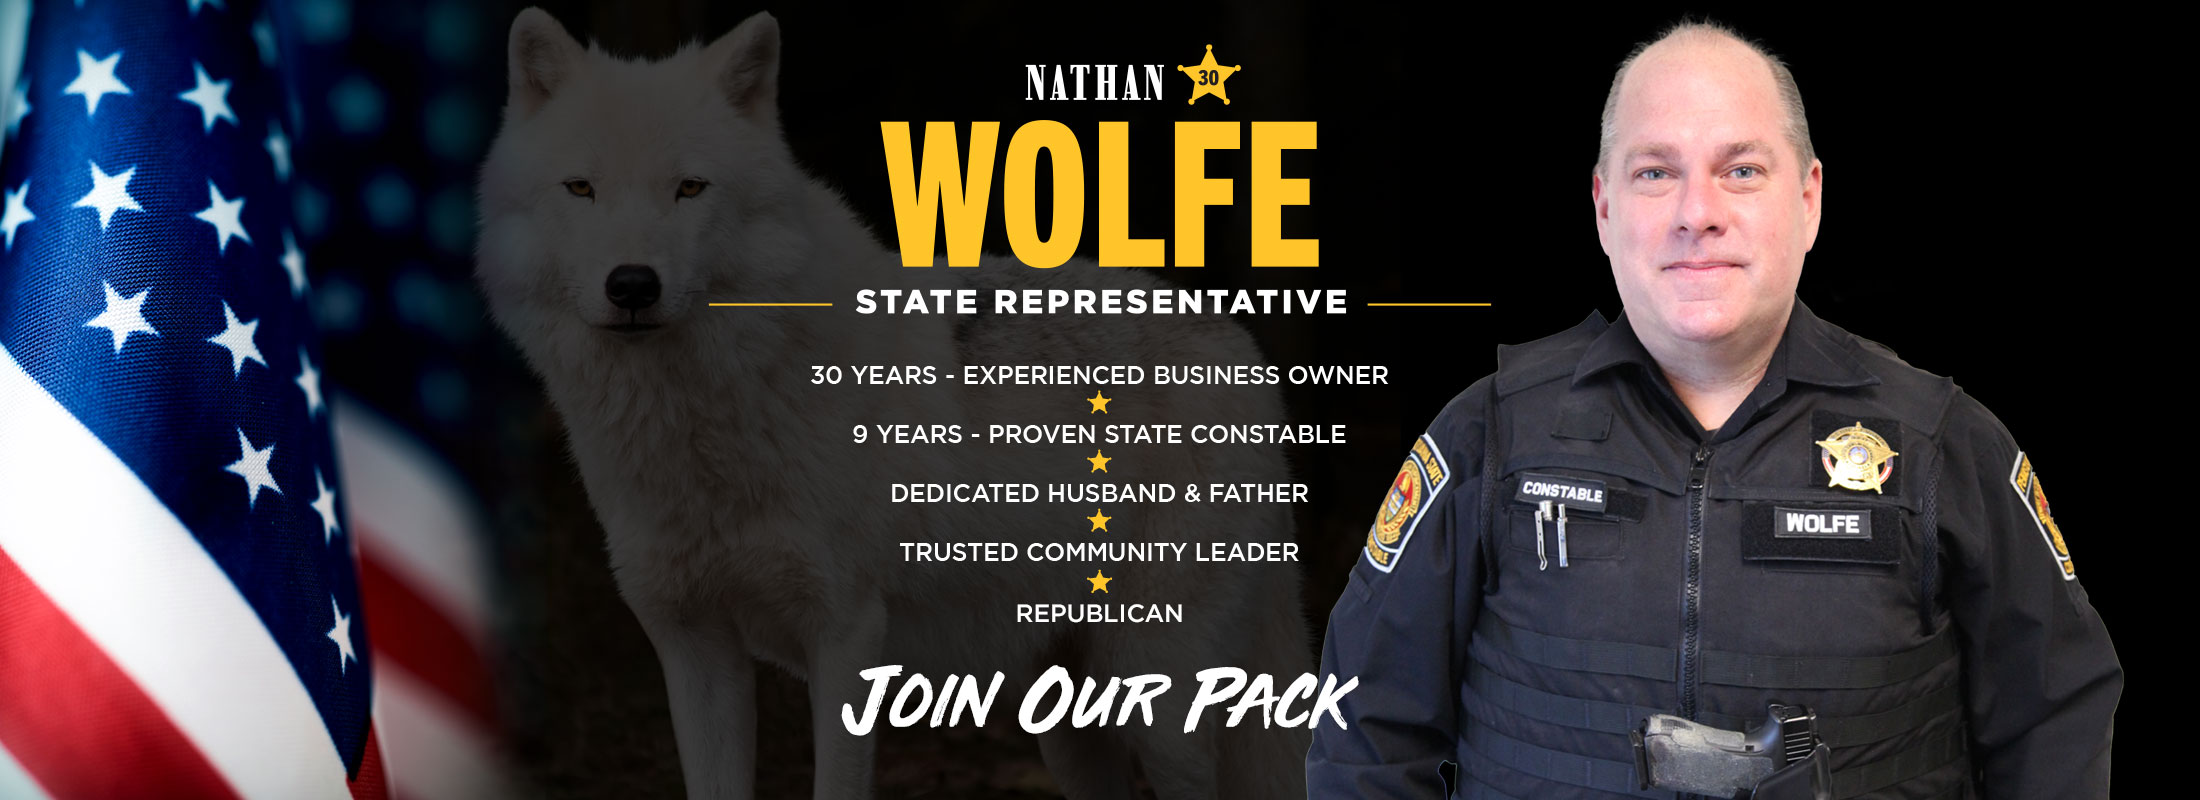 Nathan Wolfe for State Representative